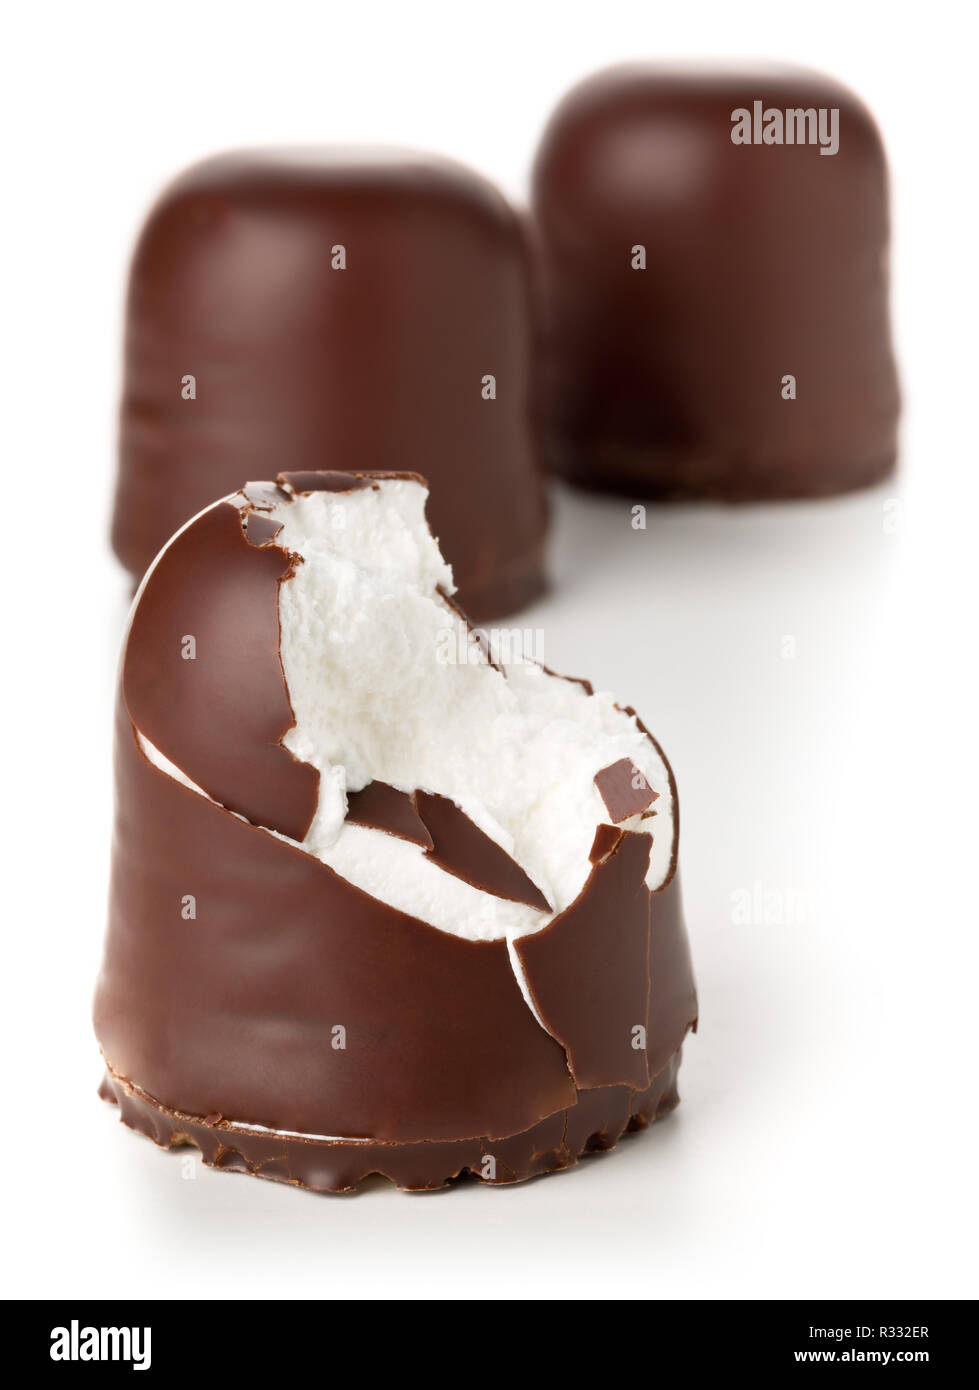 Whole and bitten off german specialty sweet 'Schokokuss' or 'Schokoschaumkuss' (small chocolate-covered cake filled with foamy sugar) over white backg Stock Photo